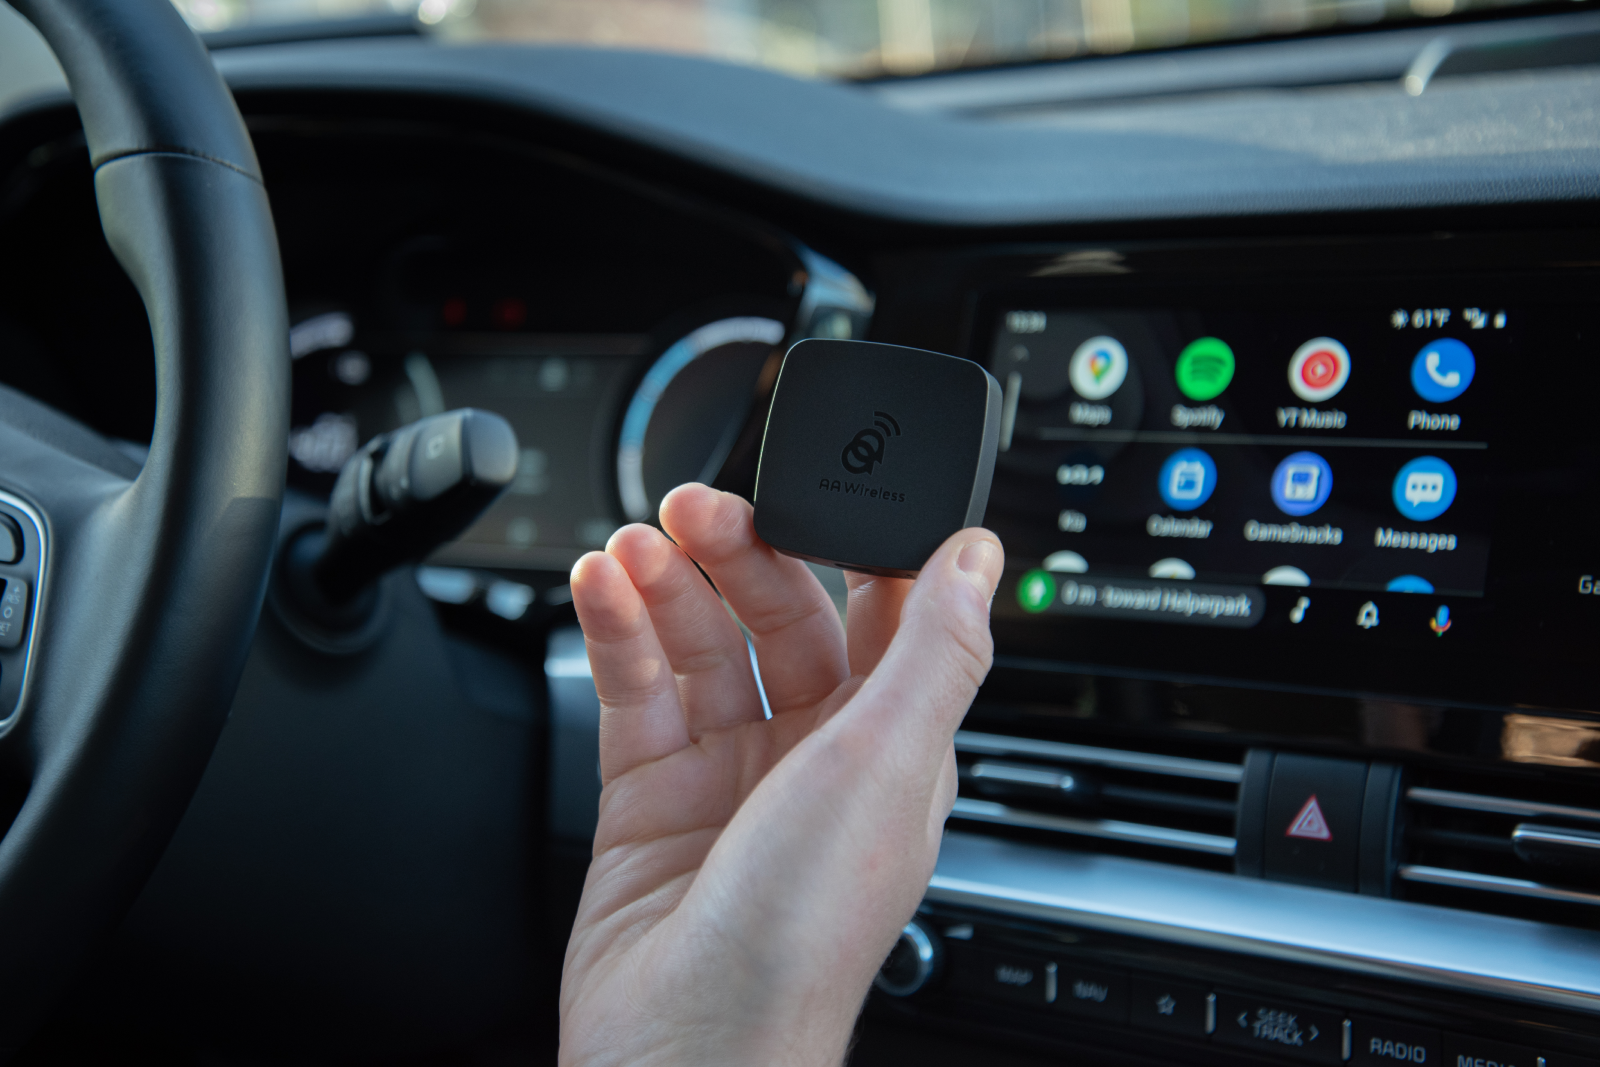 5 reasons the AAWireless dongle is a great choice for Android Auto